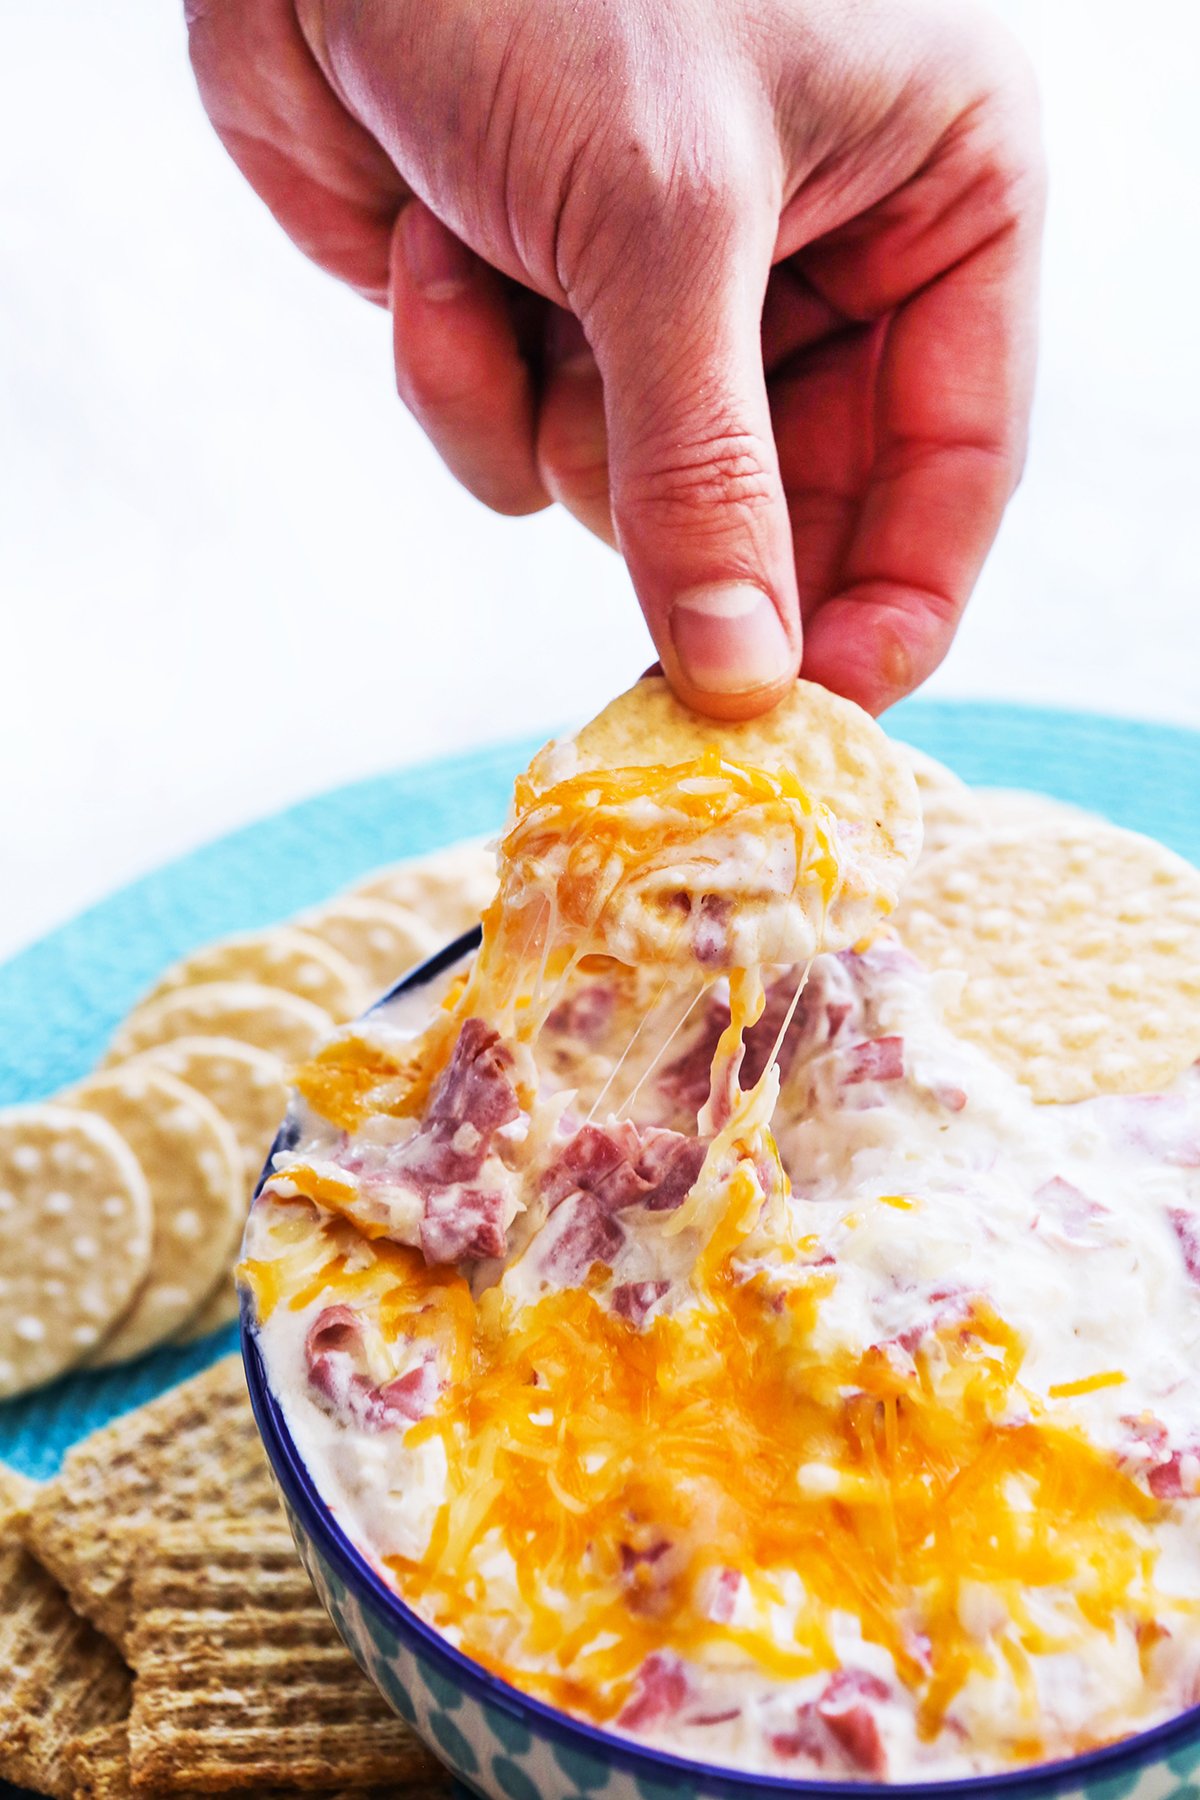 Hand pulling a cracker from a bowl filled with reuben dip and sauerkraut.